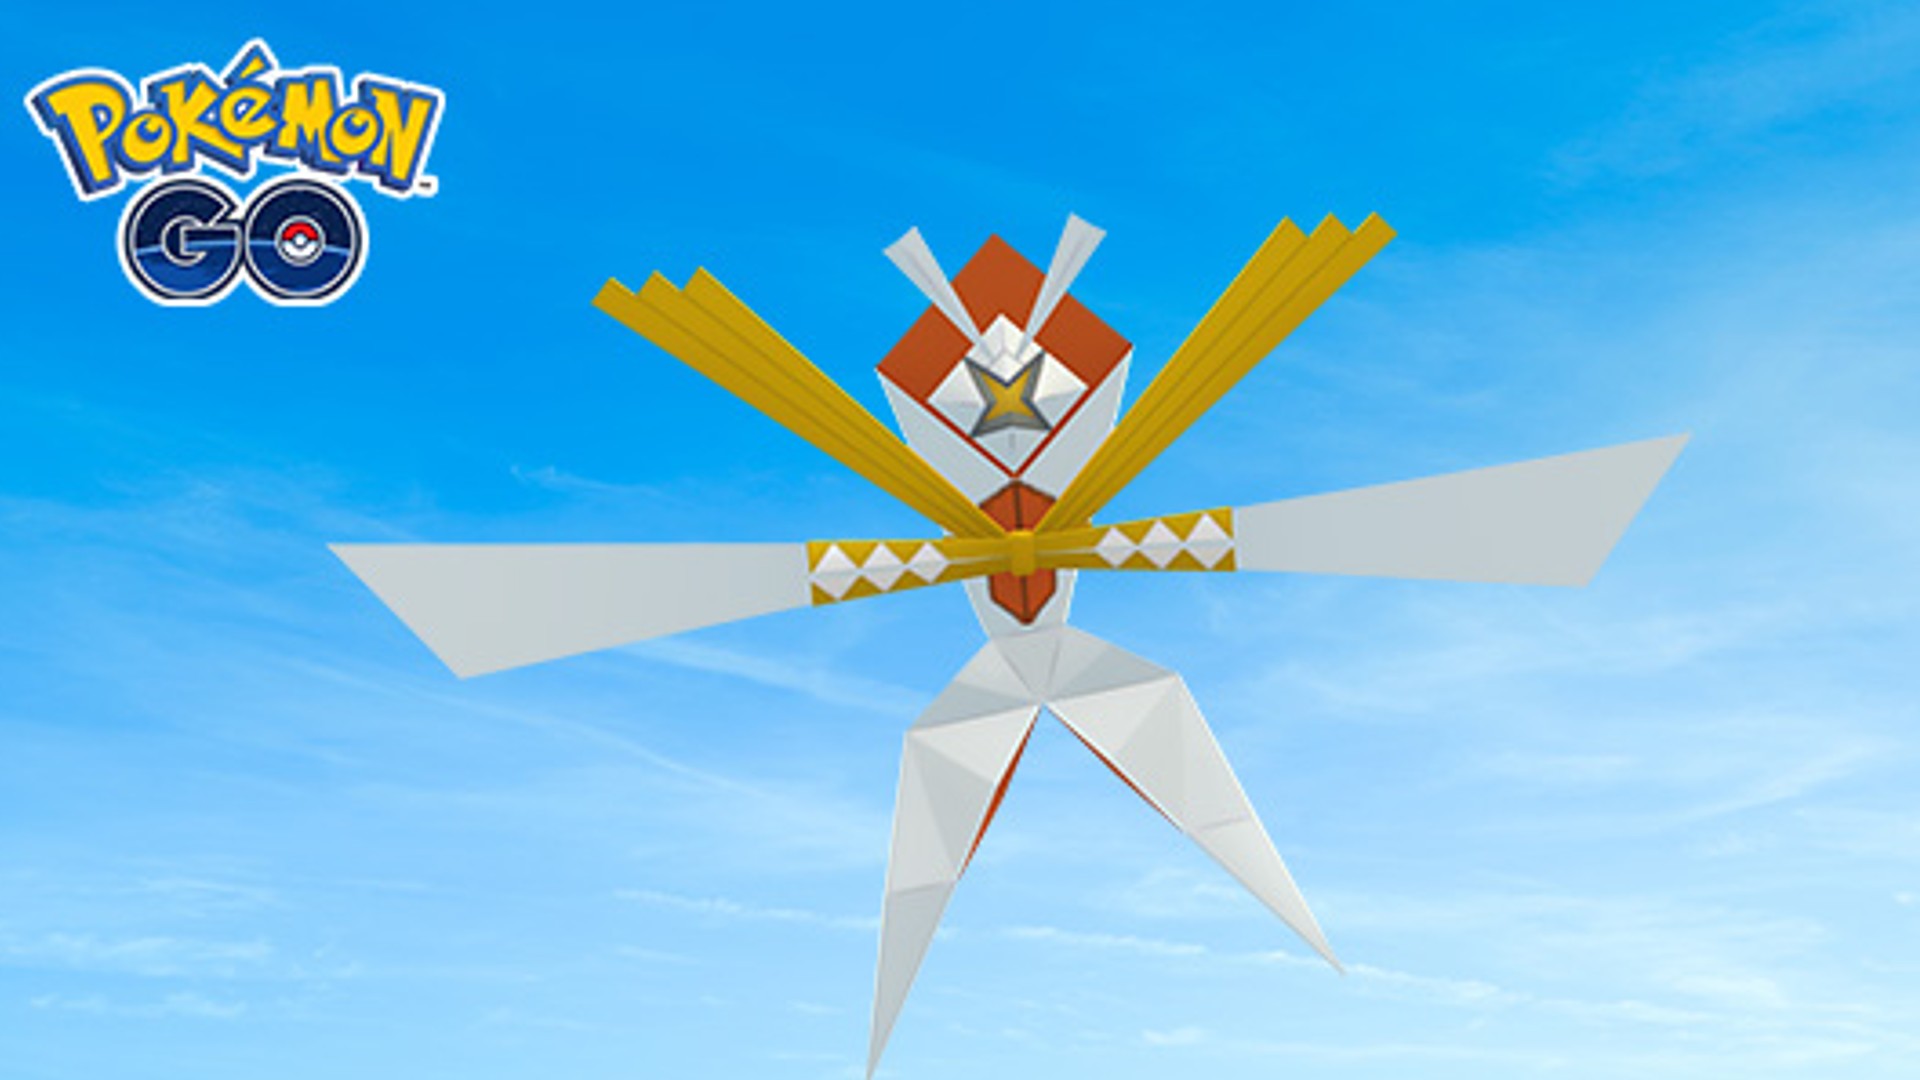 Pokémon Go Ho-oh best movesets, weakness, counters, and raid guide